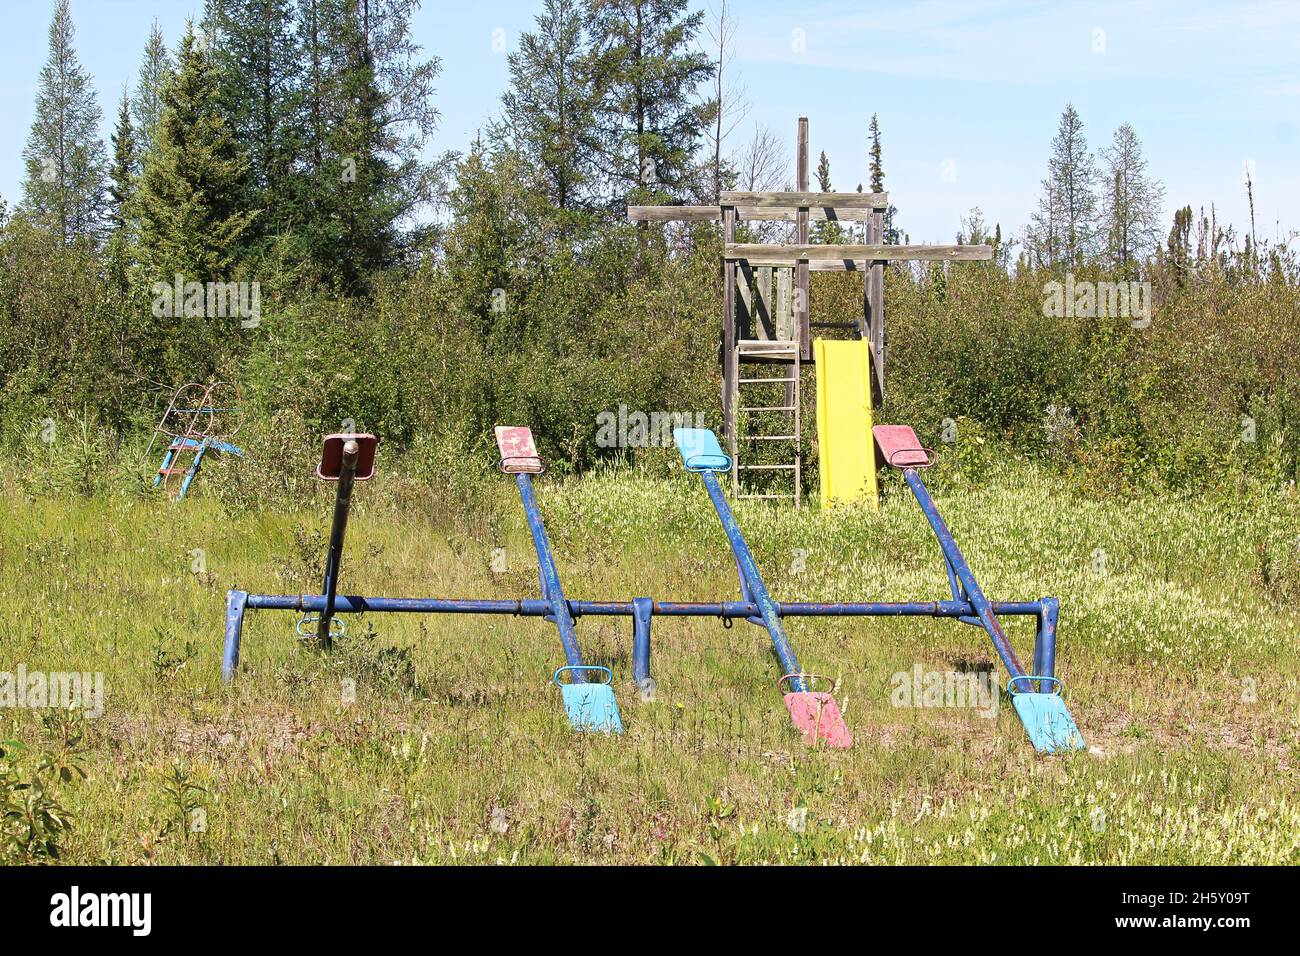 An unmaintained playground with overgrown grass Stock Photo